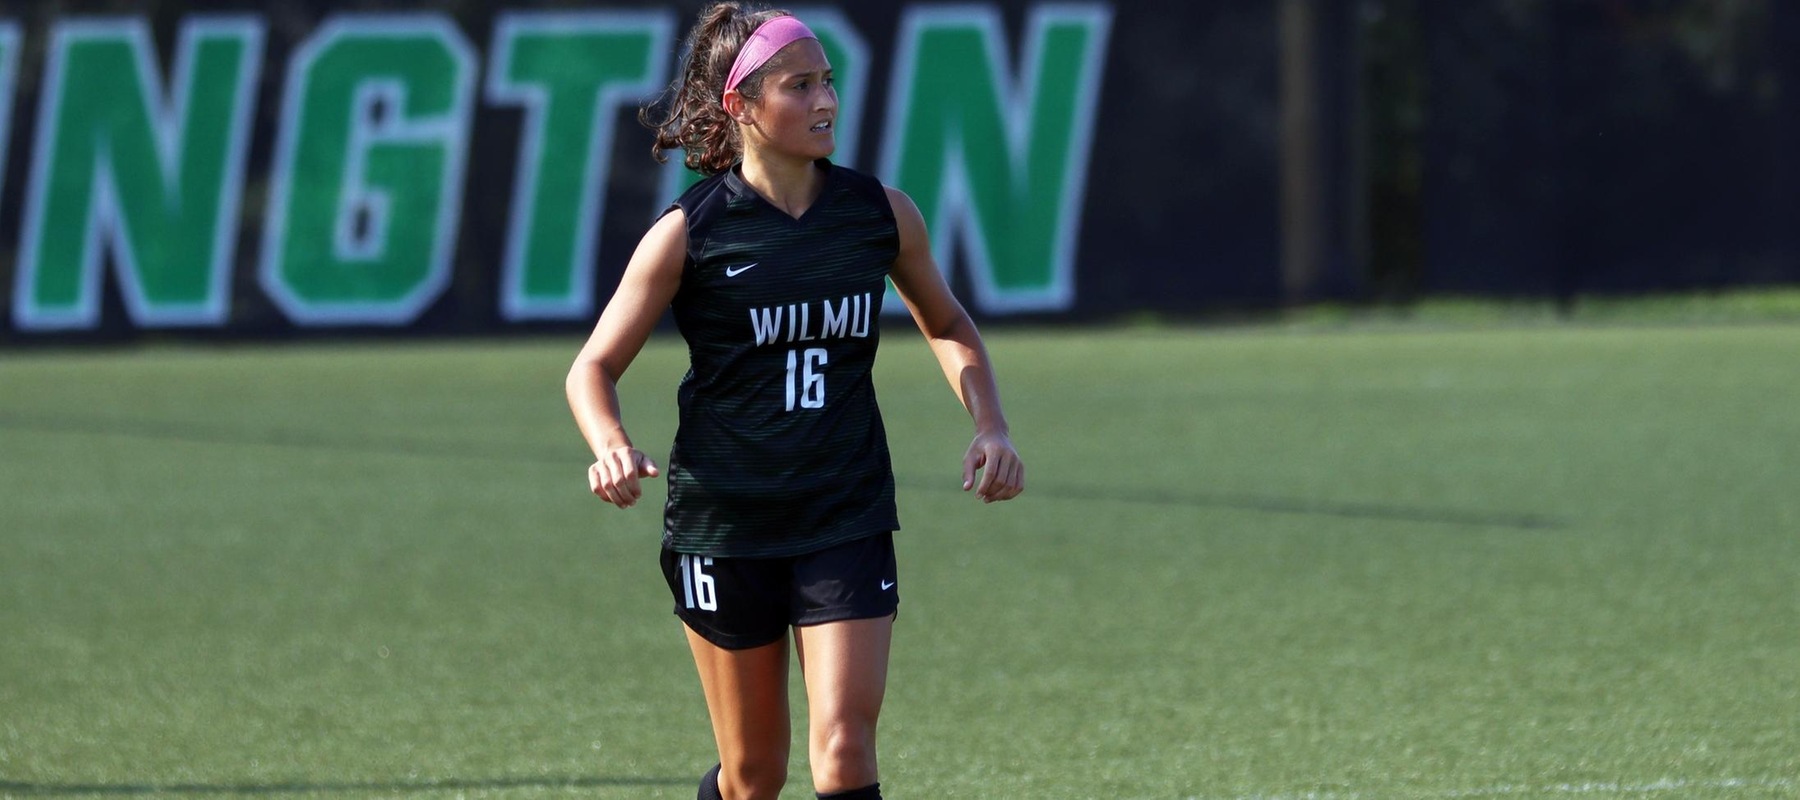 File photo of Kailynn Ortiz who scored the game-winner in the 86th minute at Alliance. Copyright 2022; Wilmington University. All rights reserved. Photo by Dan Lauletta. August 28, 2022 vs. Adelphi.